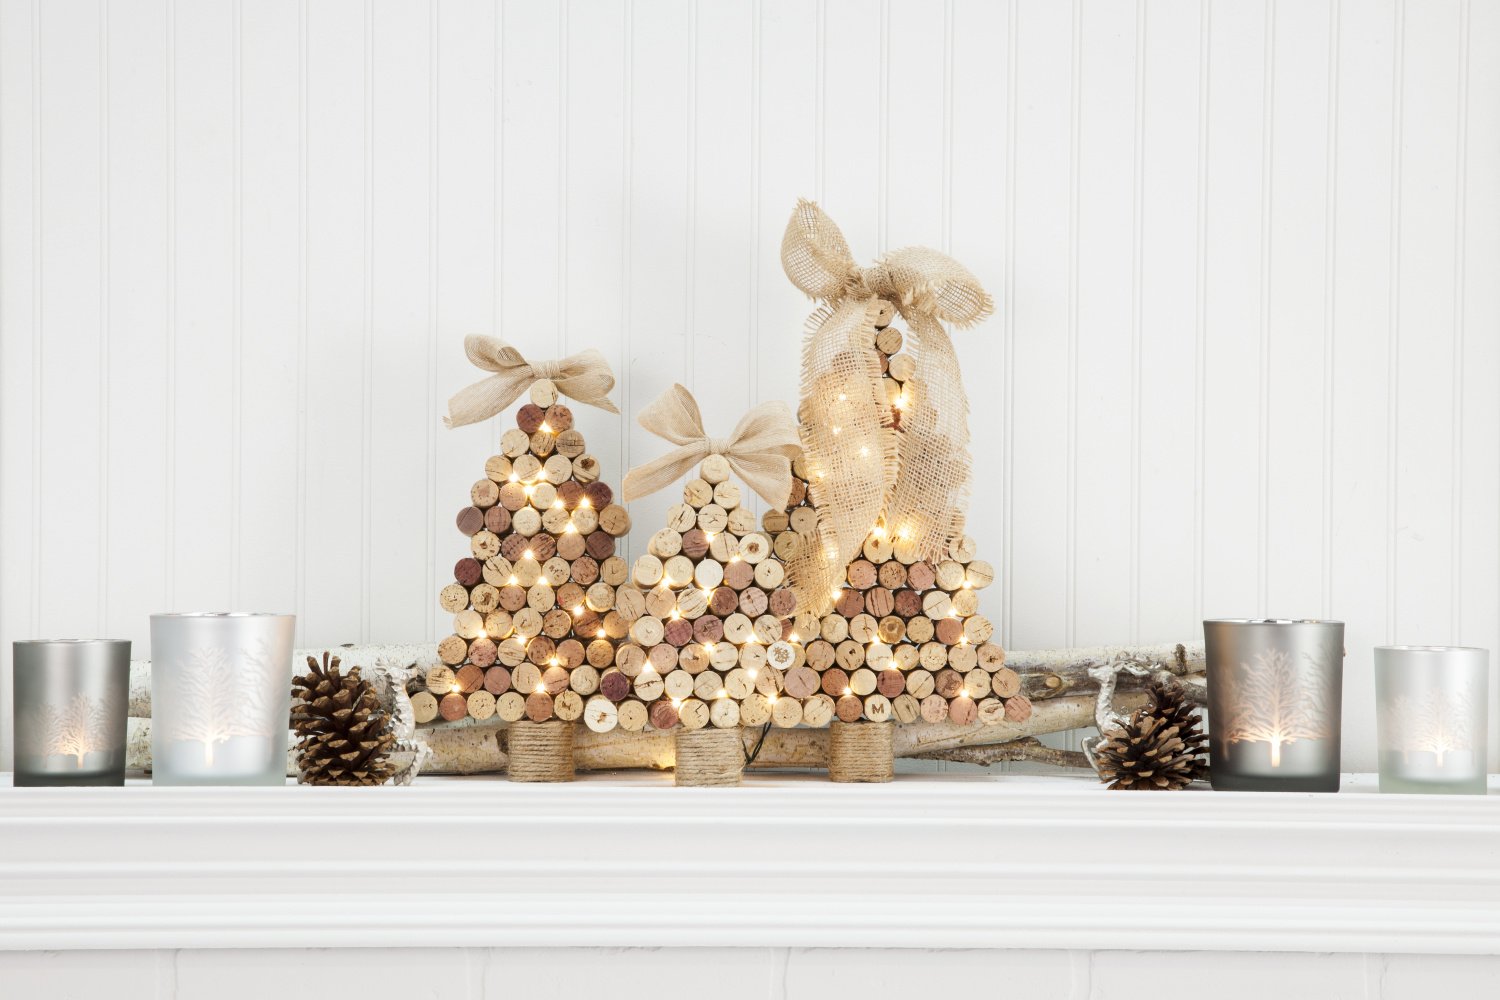 Budget-Friendly Holiday Decor Ideas that Make a Statement